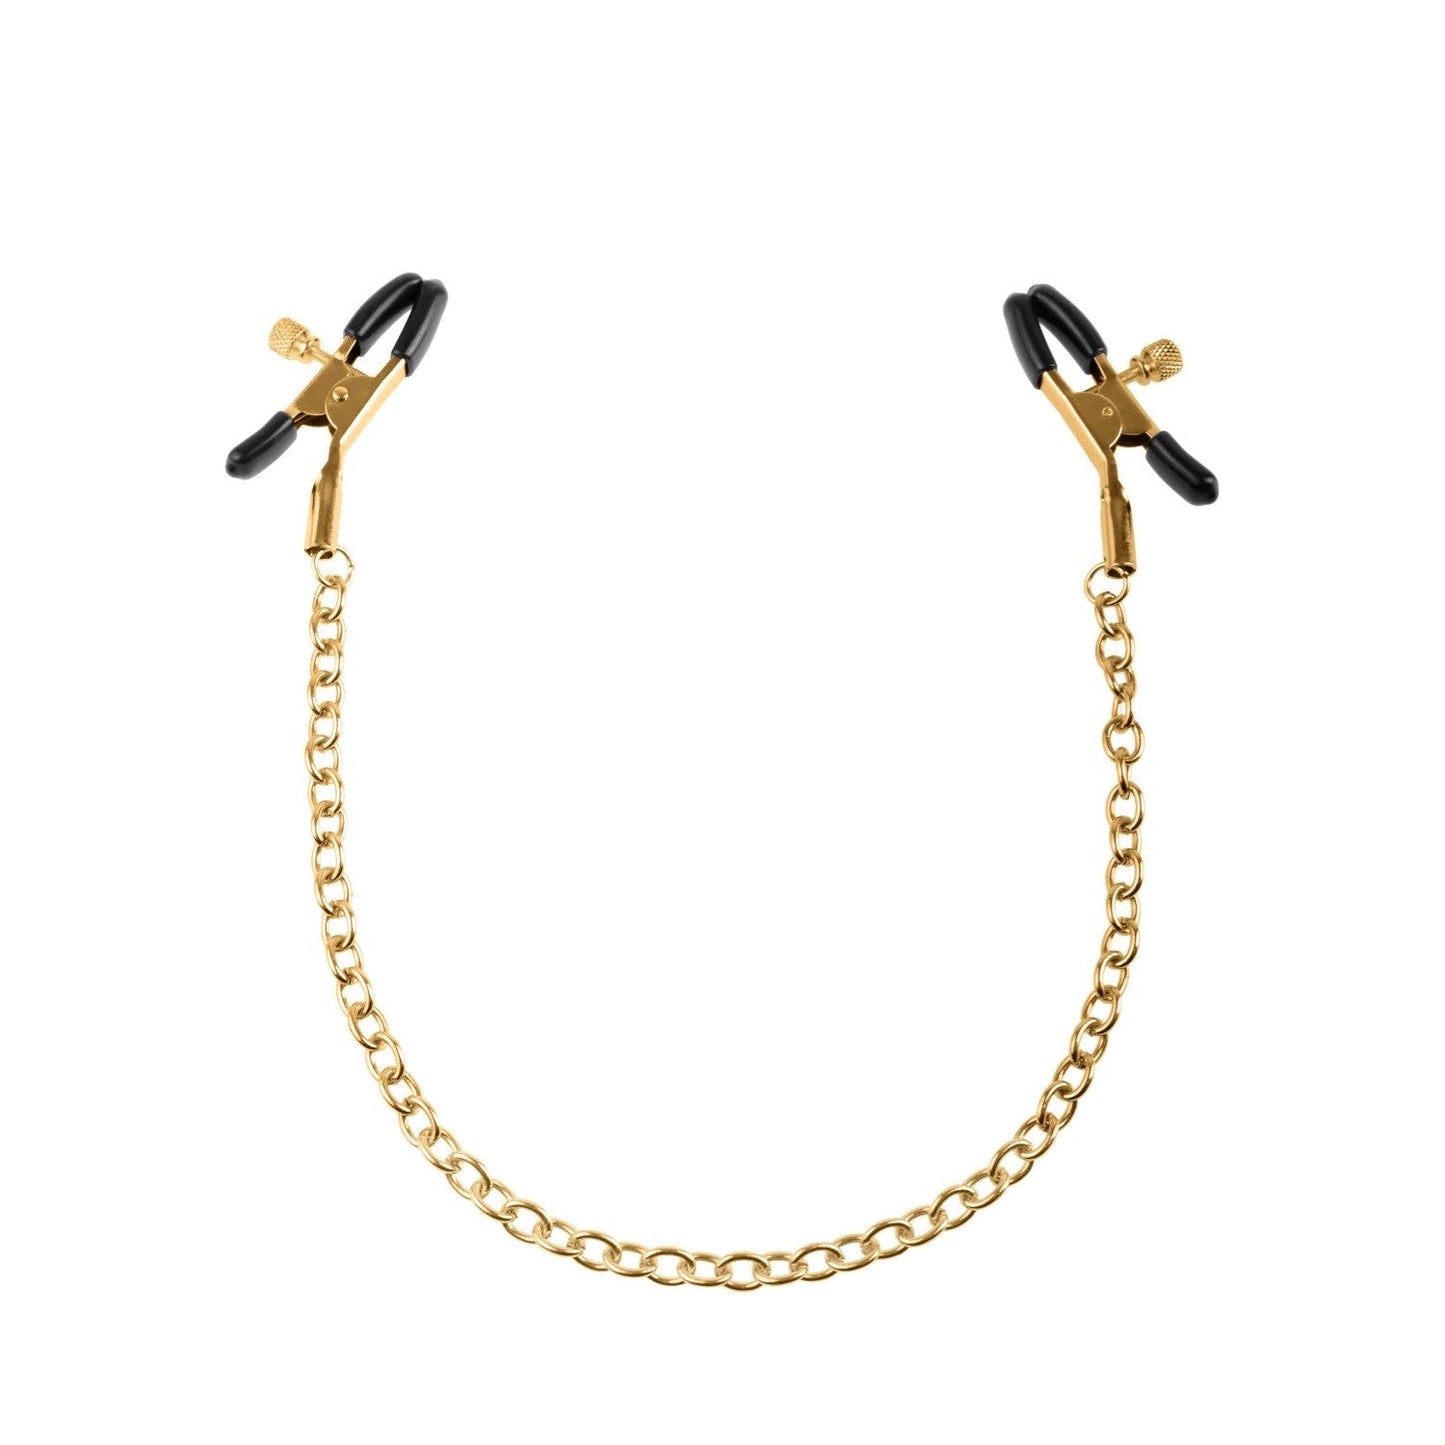 Chain Nipple Clamps - Gold Nipple Clamps with Chain